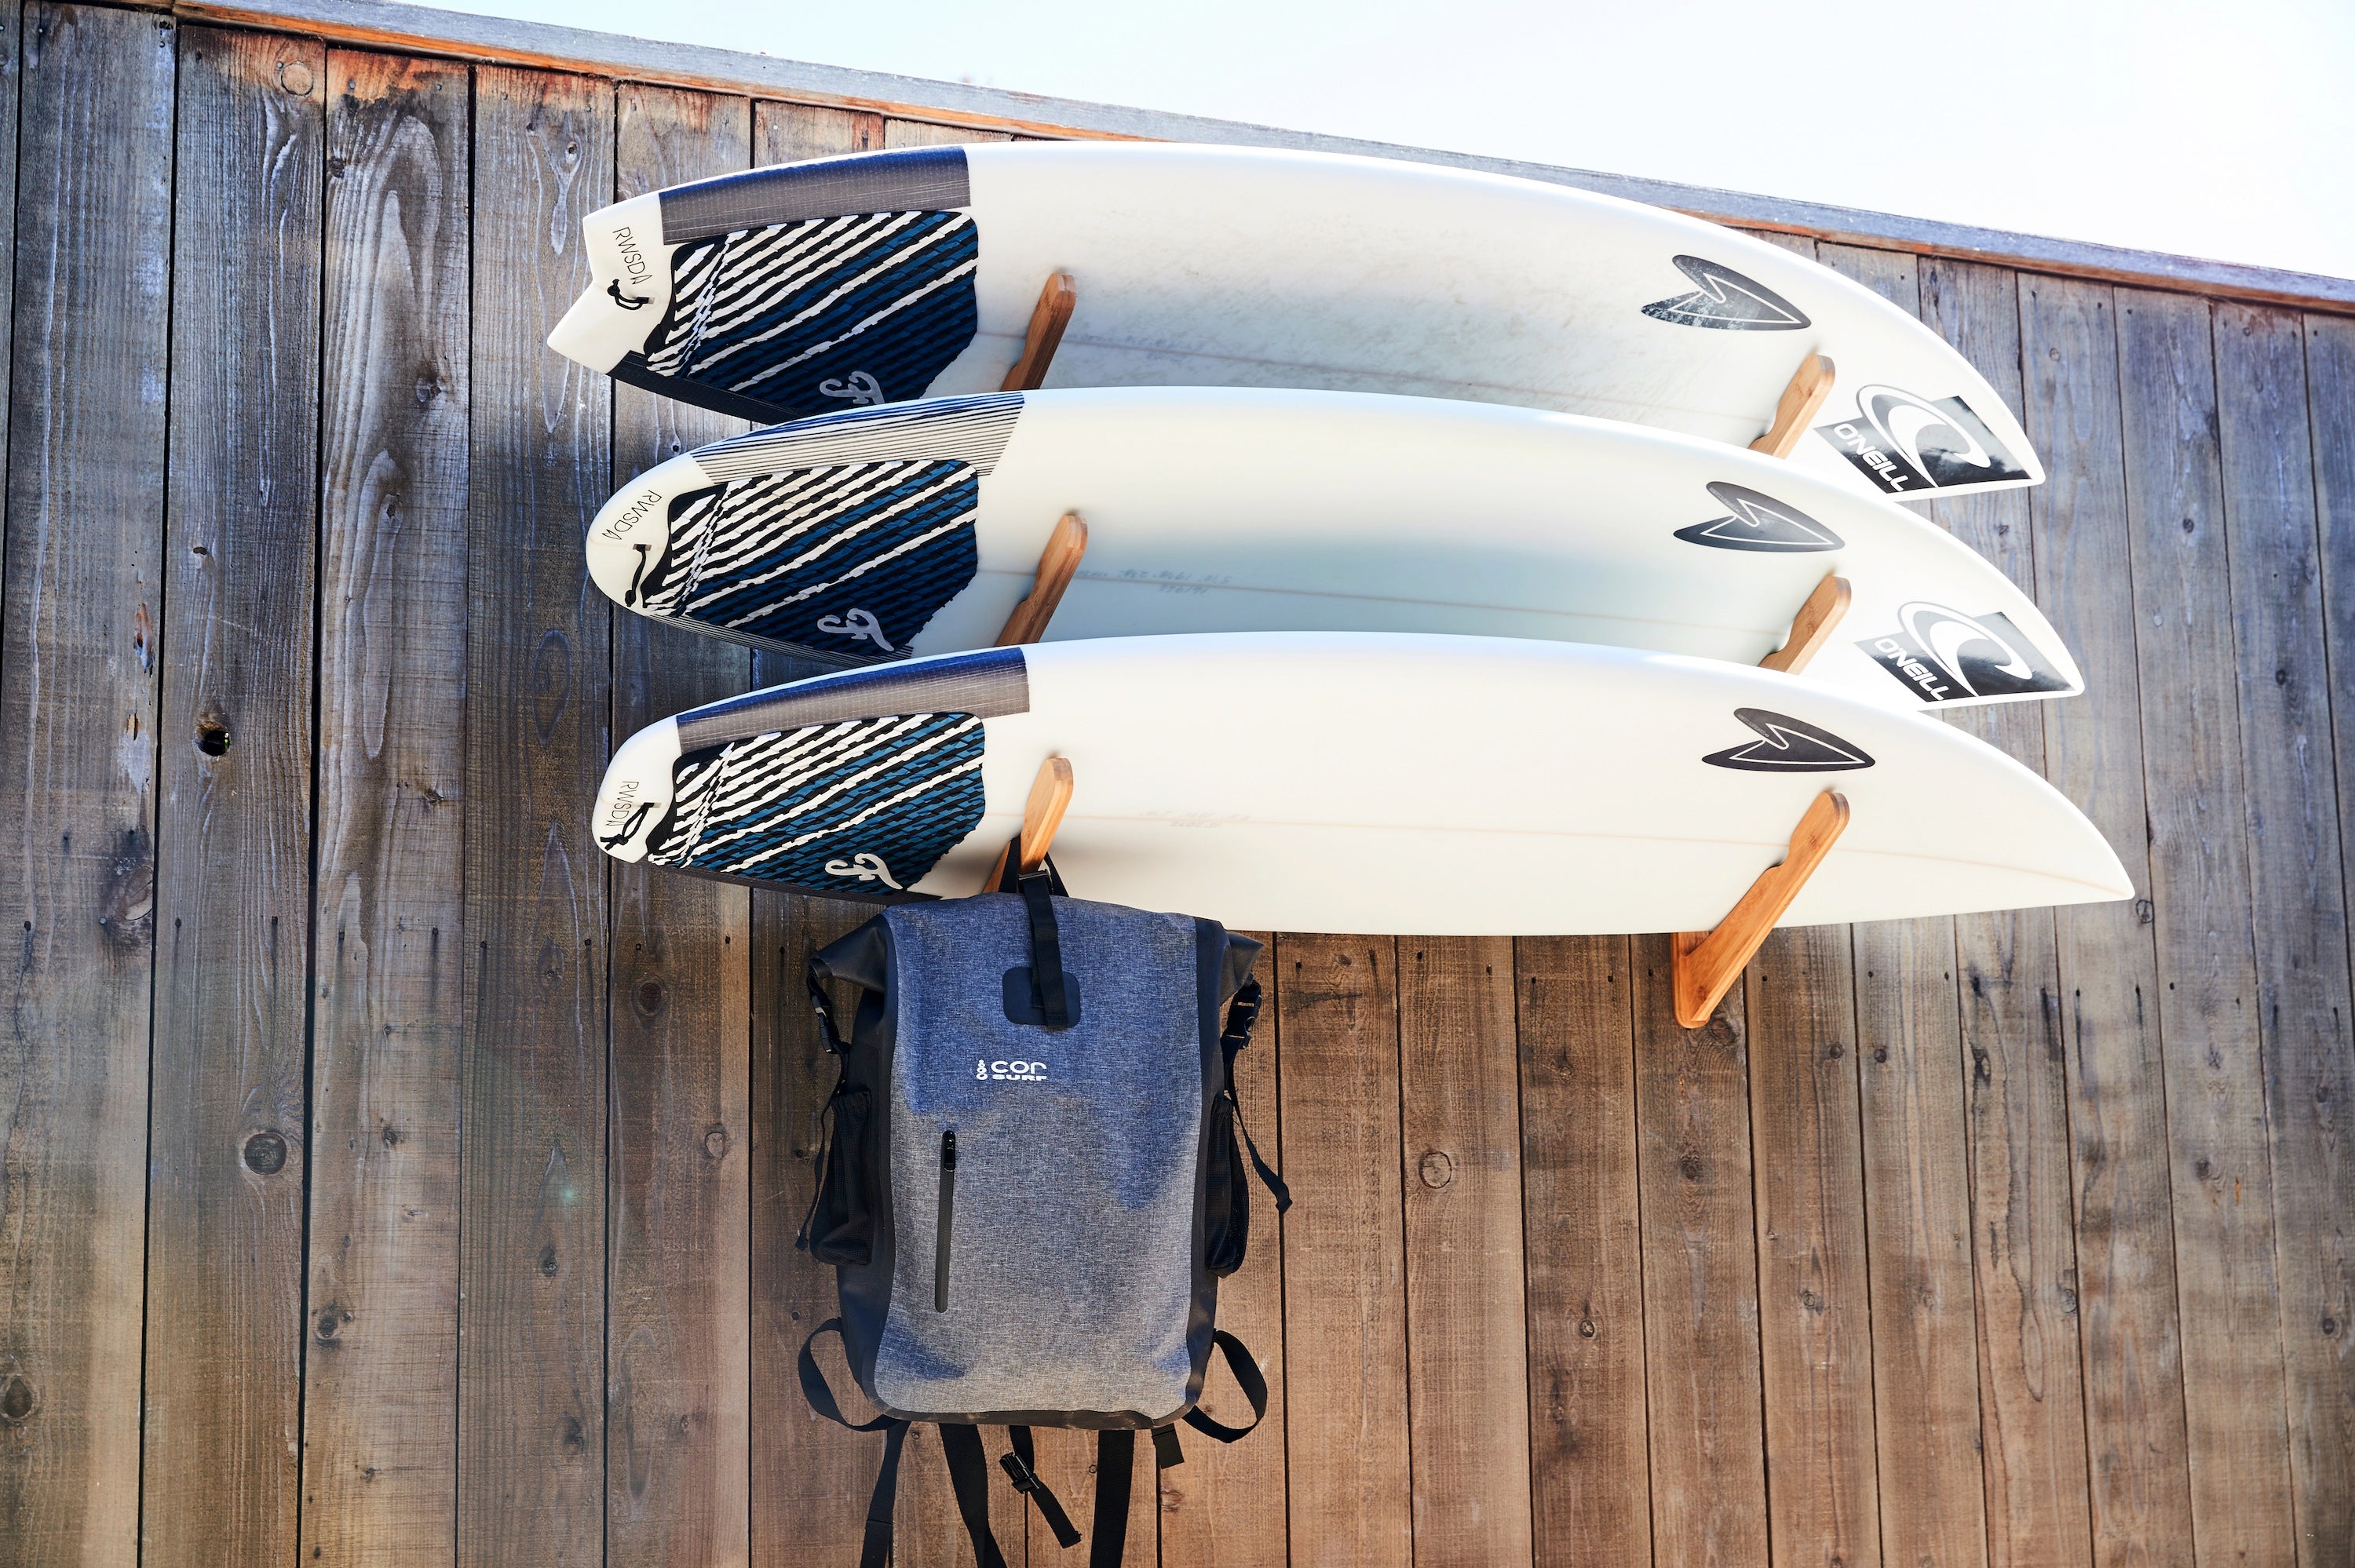 Get your Surfboards Organized with COR Surf and Paddleboard Racks